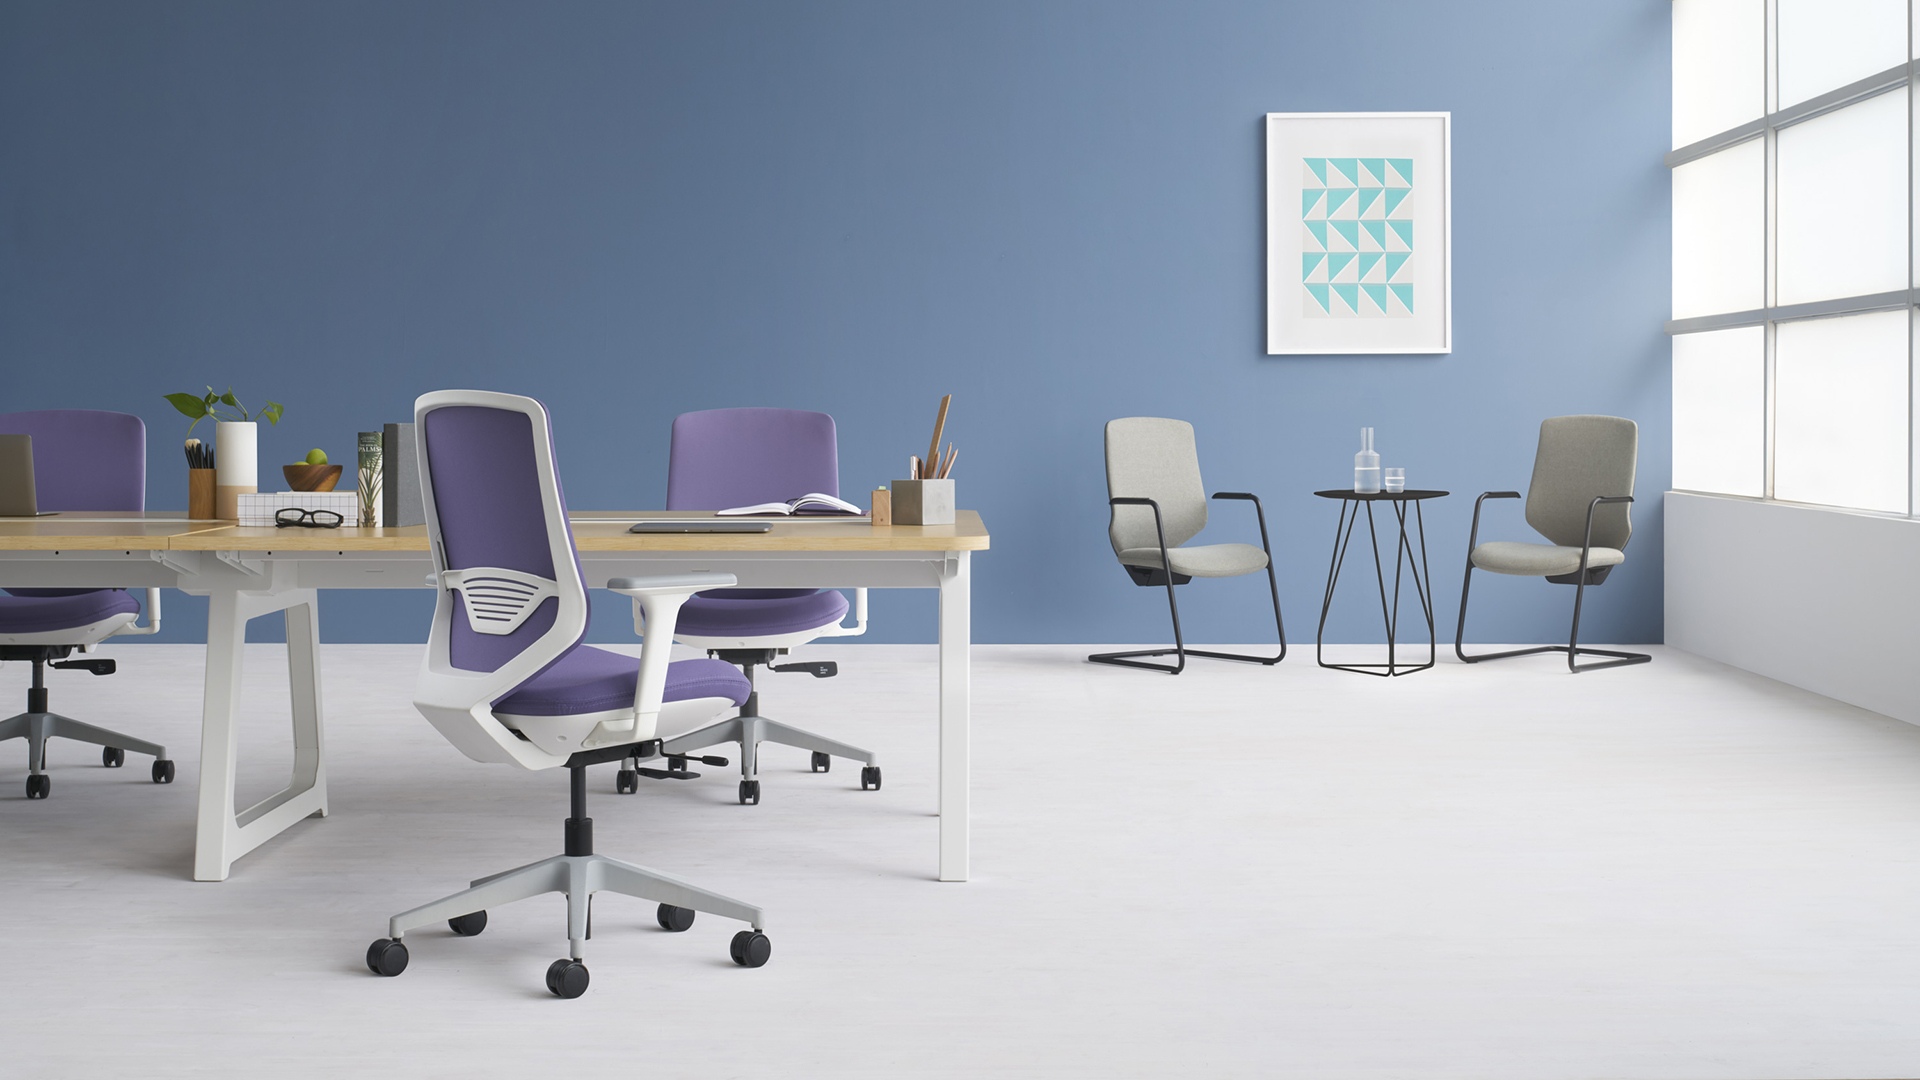 Express 2 Chair, Lifestyle